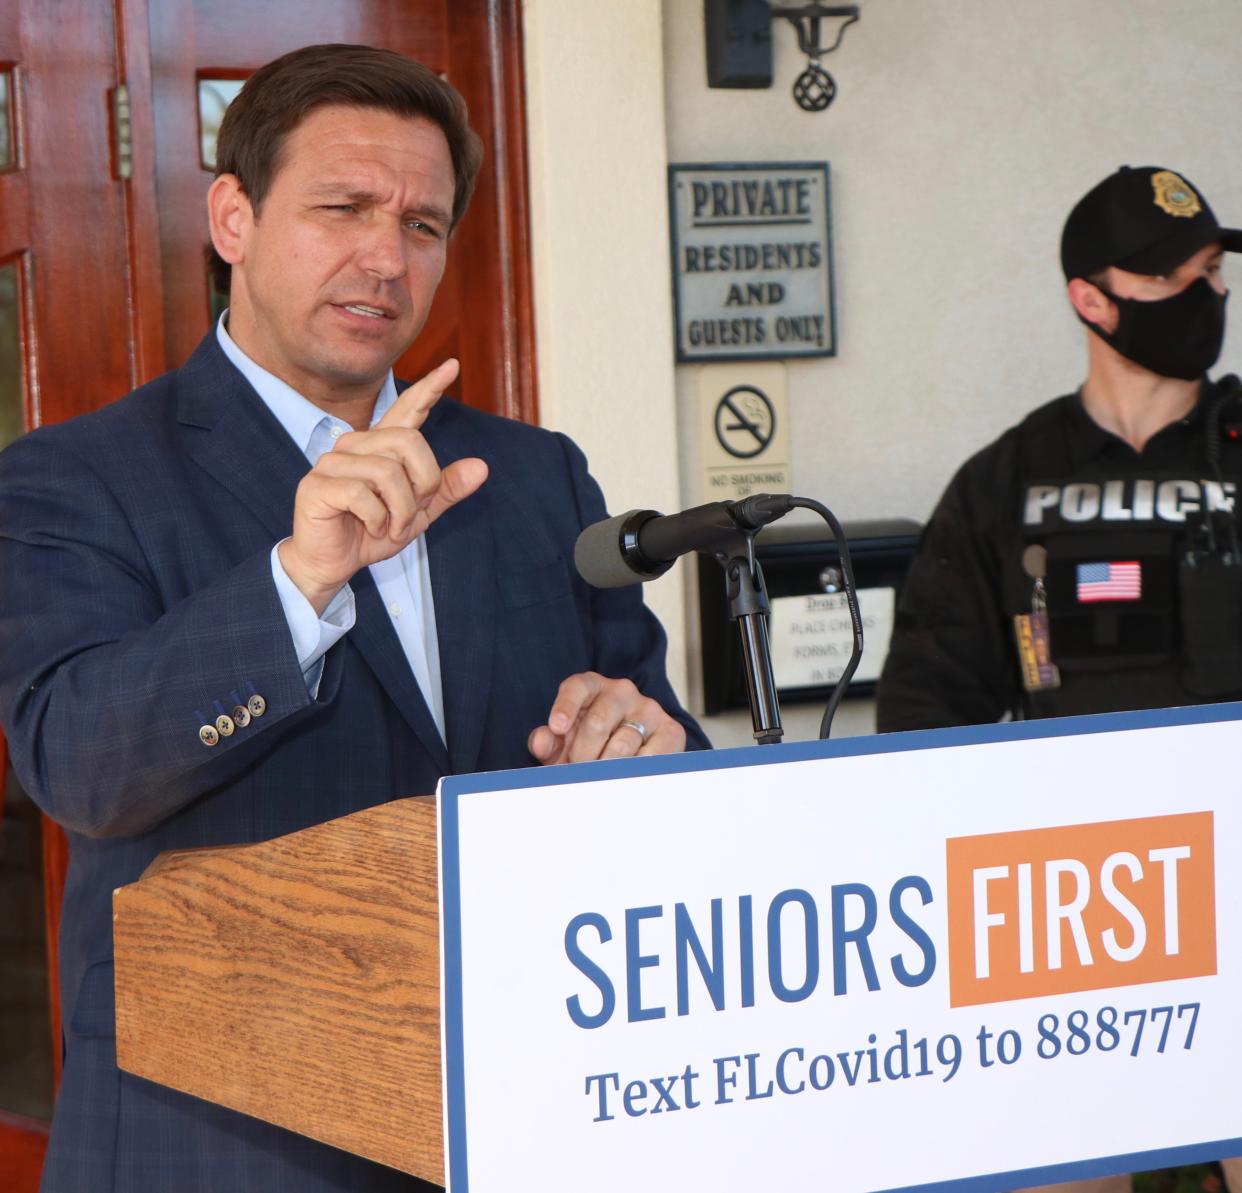 Gov. Ron DeSantis speaks at the Crane Lakes Golf and Country Club in Port Orange in 2021. He was promoting access to the coronavirus vaccine for seniors.